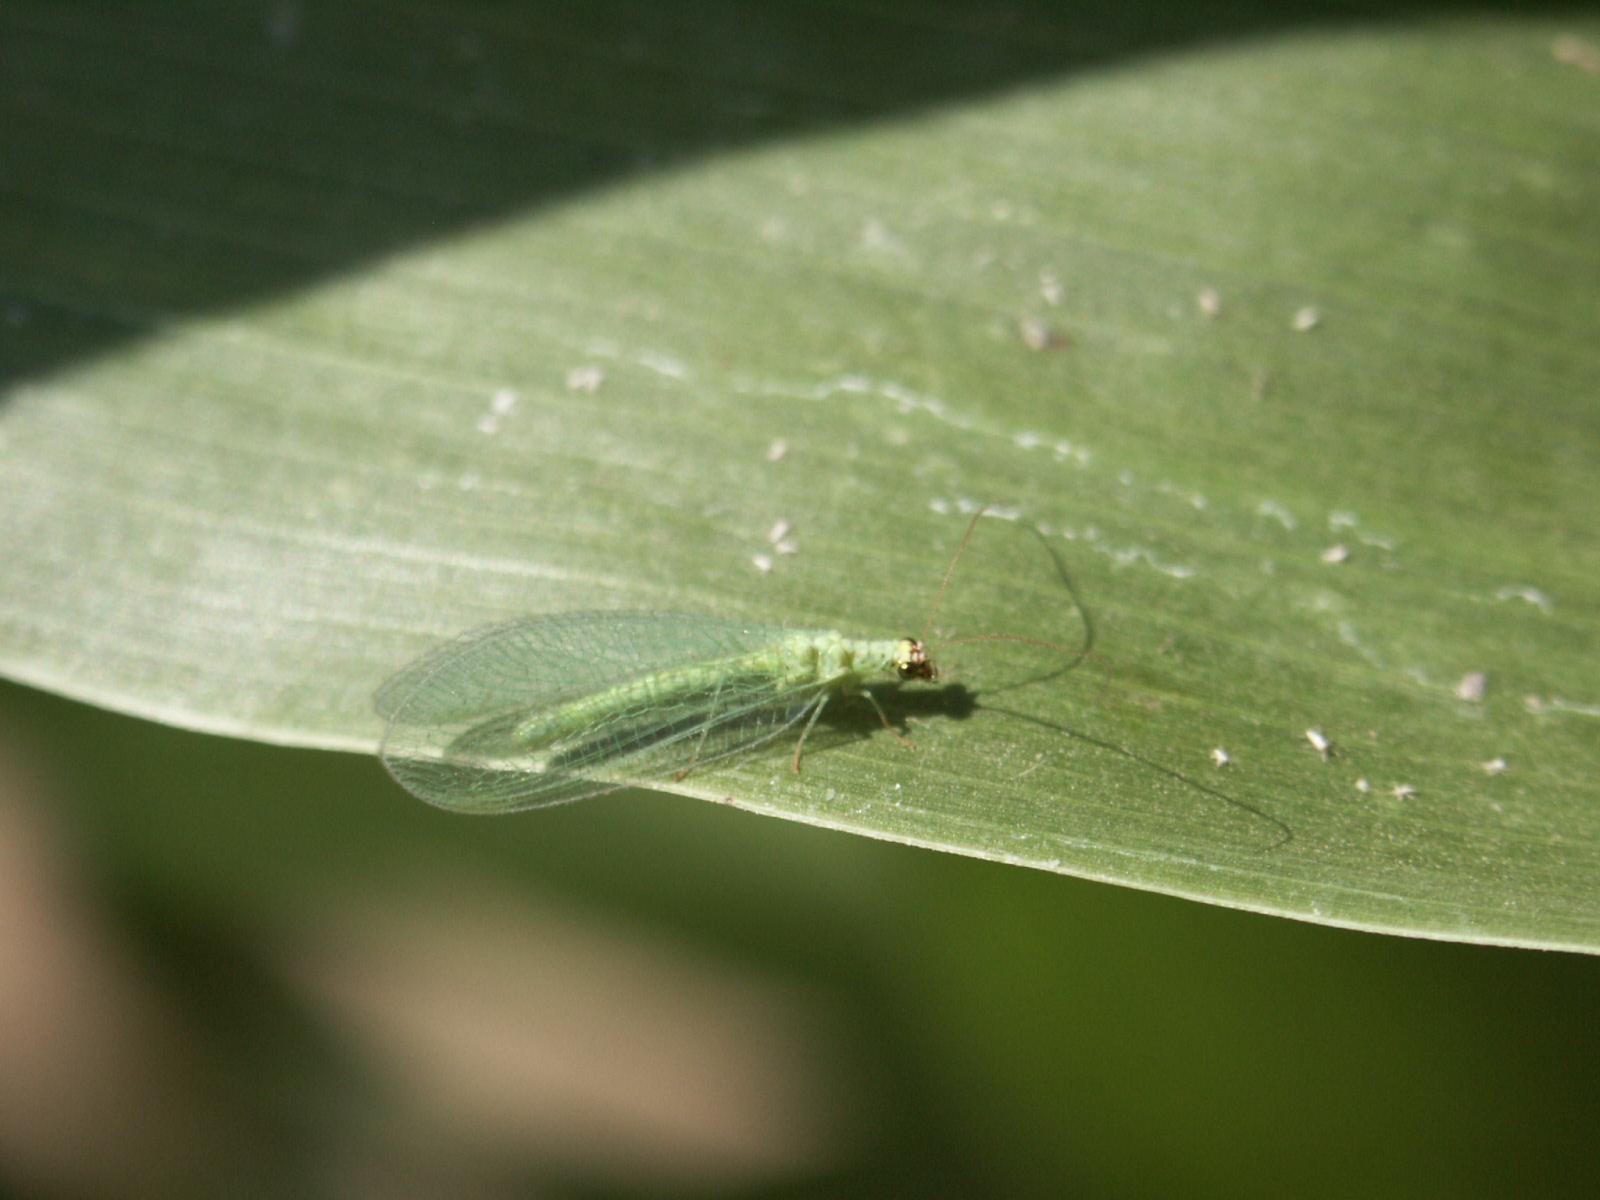 Predators. Beneficial Organisms. Insect Information